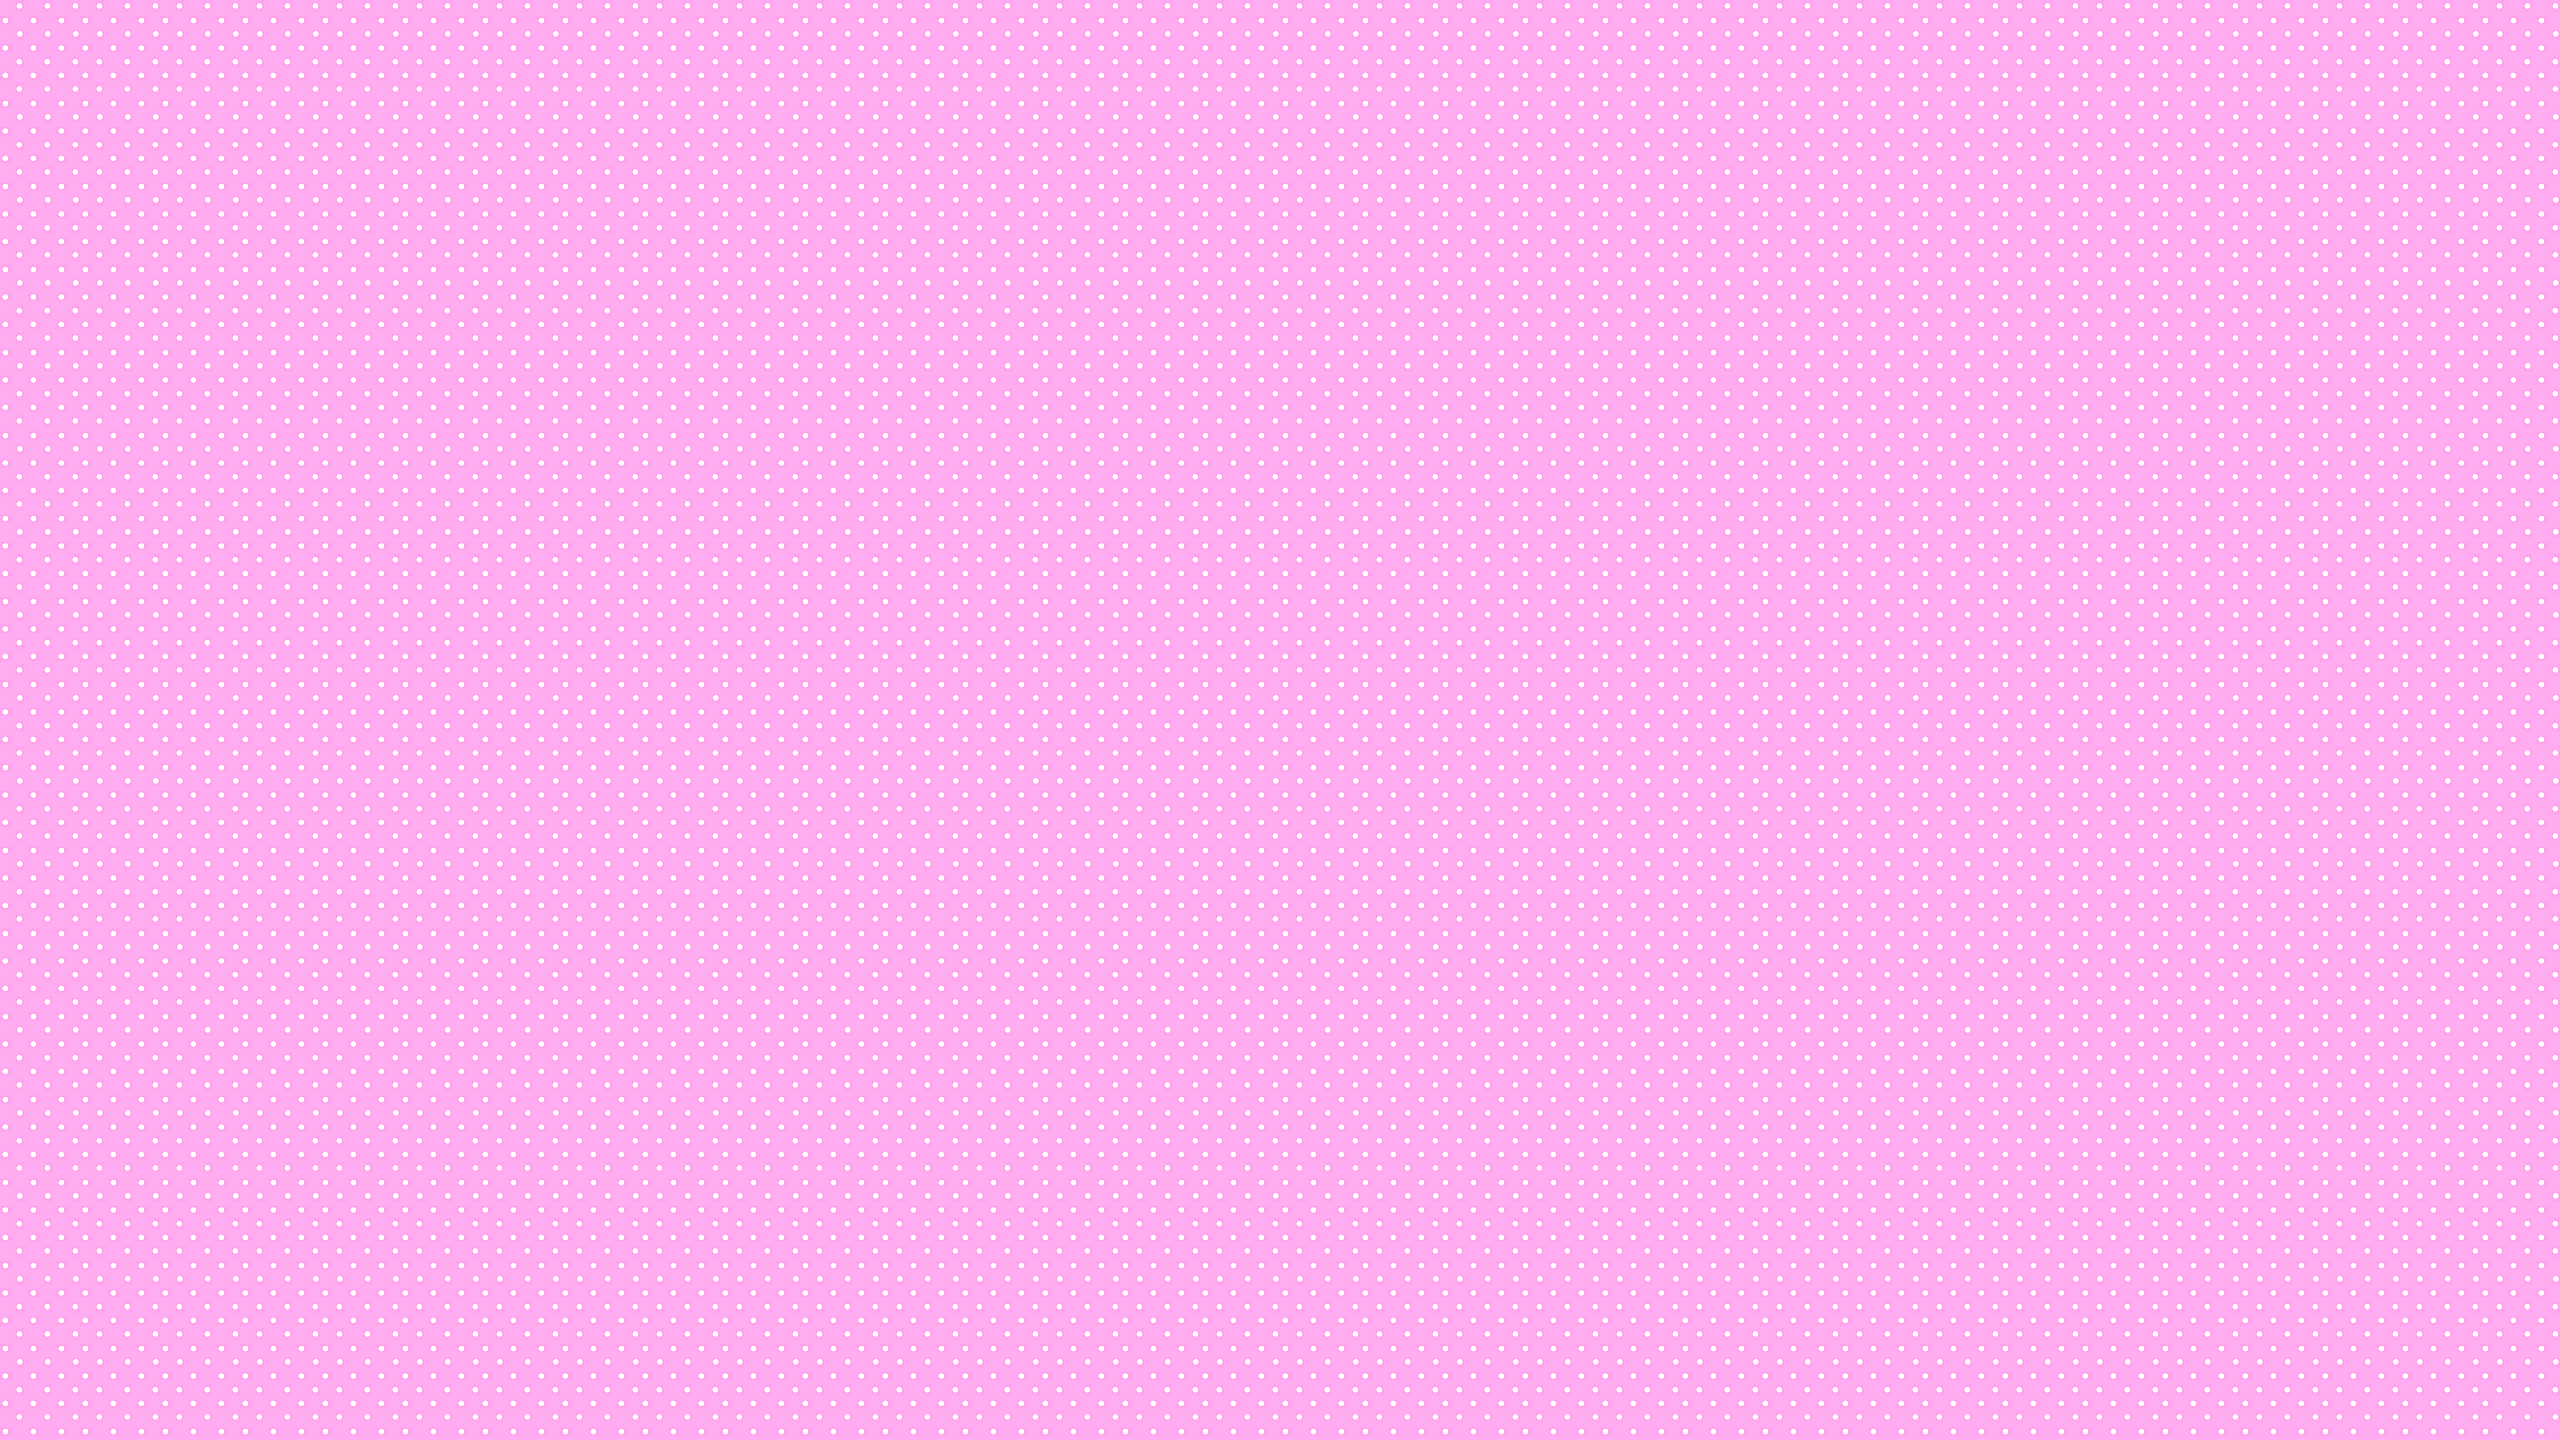 Get Pastel Pink Background Themes